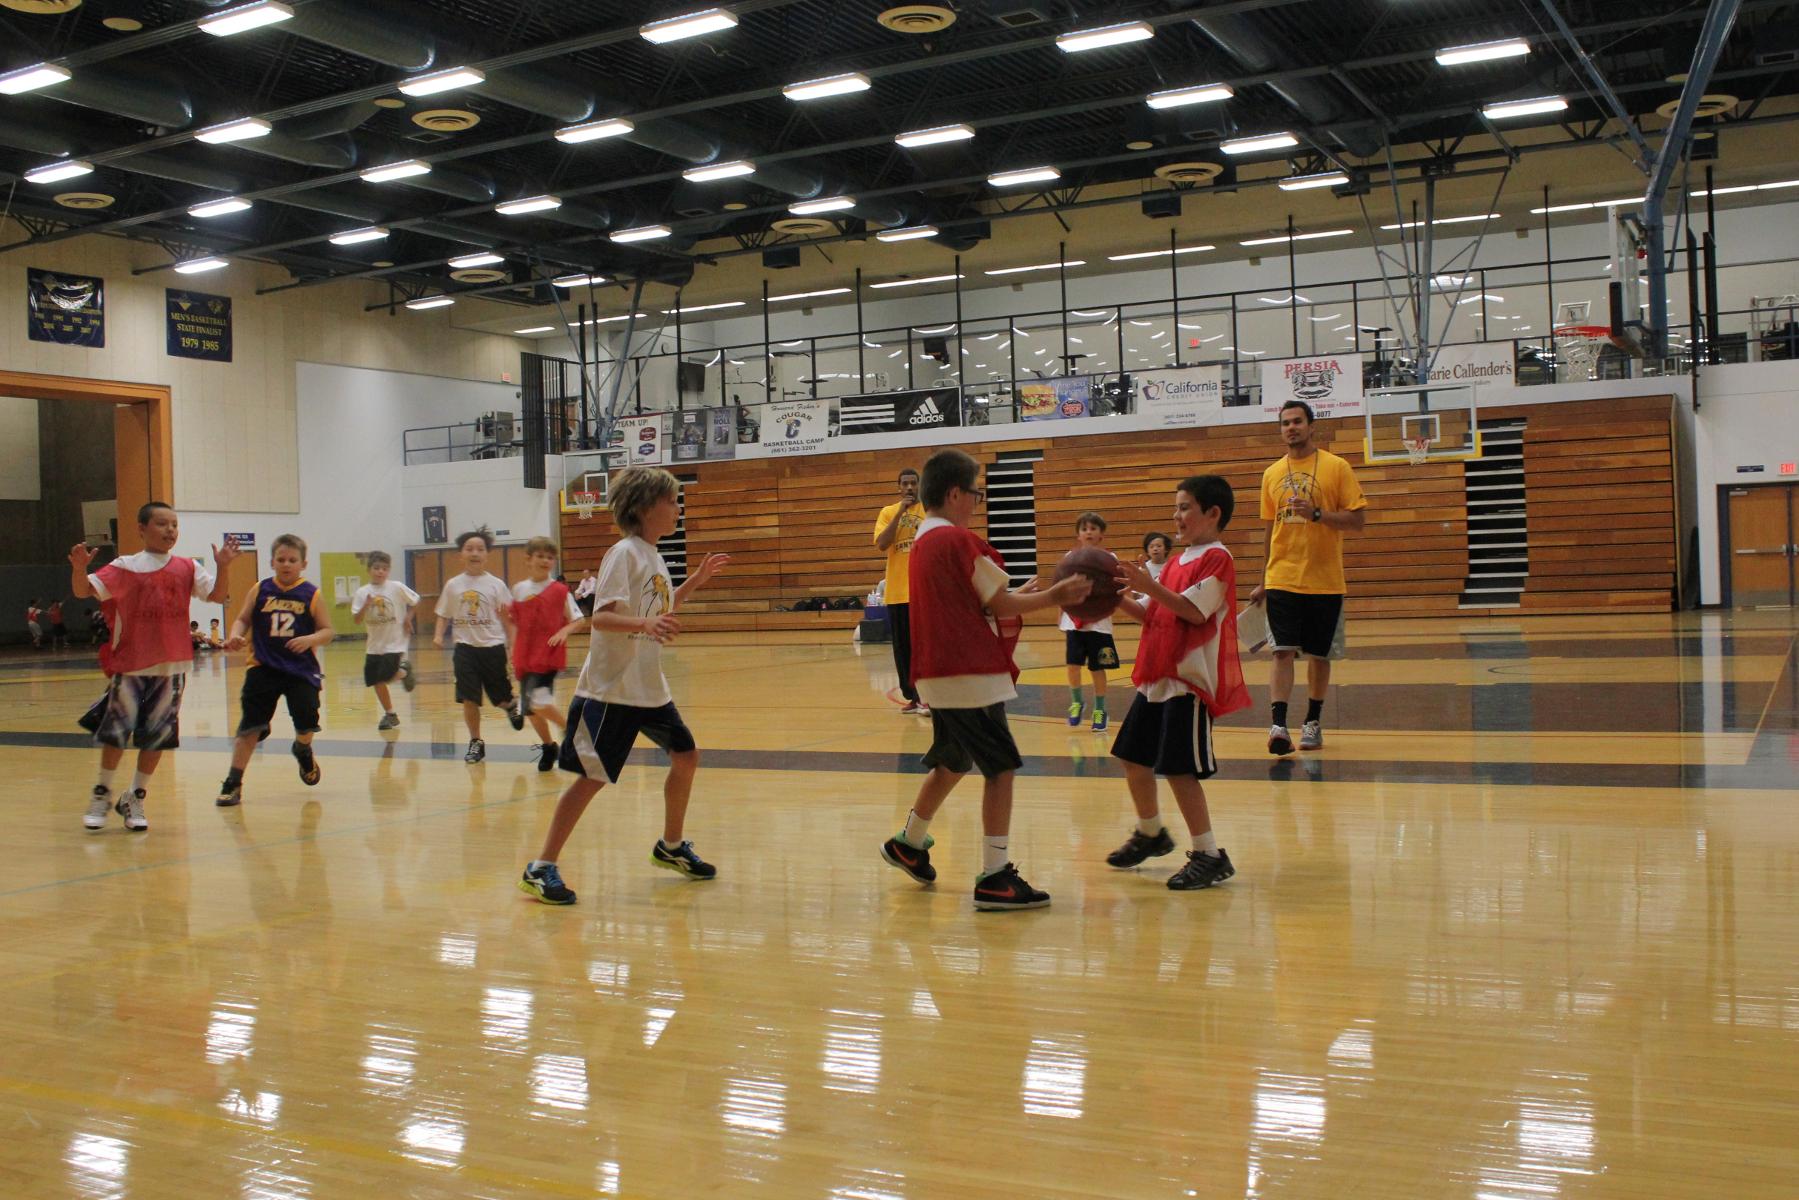 Registration Open for Second Session of 2016 Cougar Basketball Camp